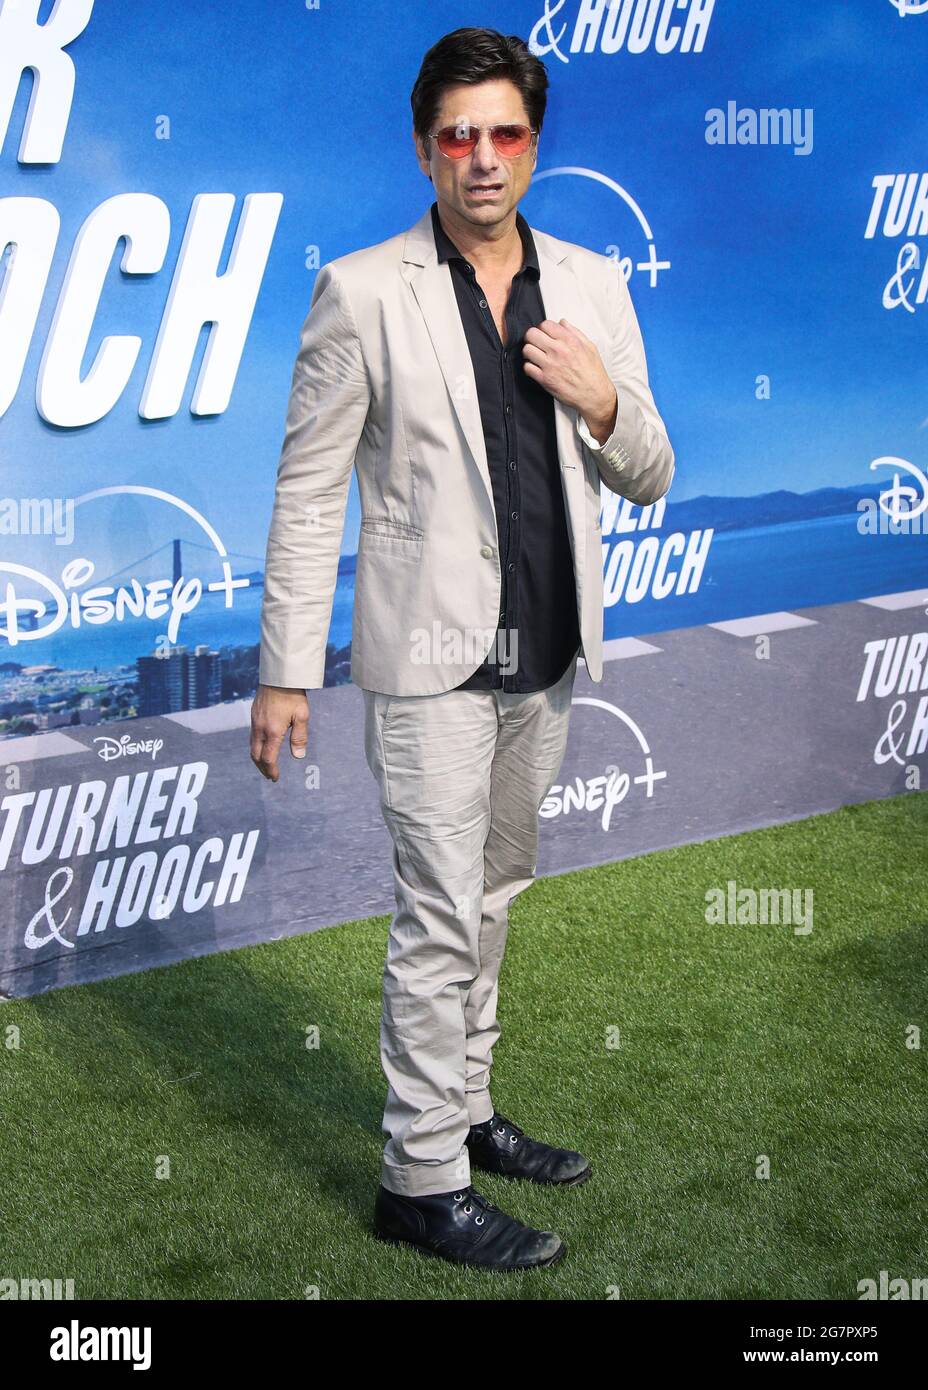 Los Angeles, United States. 15th July, 2021. CENTURY CITY, LOS ANGELES, CALIFORNIA, USA - JULY 15: Actor John Stamos arrives at the Disney  'Turner & Hooch' Los Angeles Premiere Event held at the Westfield Century City Mall on July 15, 2021 in Century City, Los Angeles, California, United States. (Photo by Xavier Collin/Image Press Agency/Sipa USA) Credit: Sipa USA/Alamy Live News Stock Photo